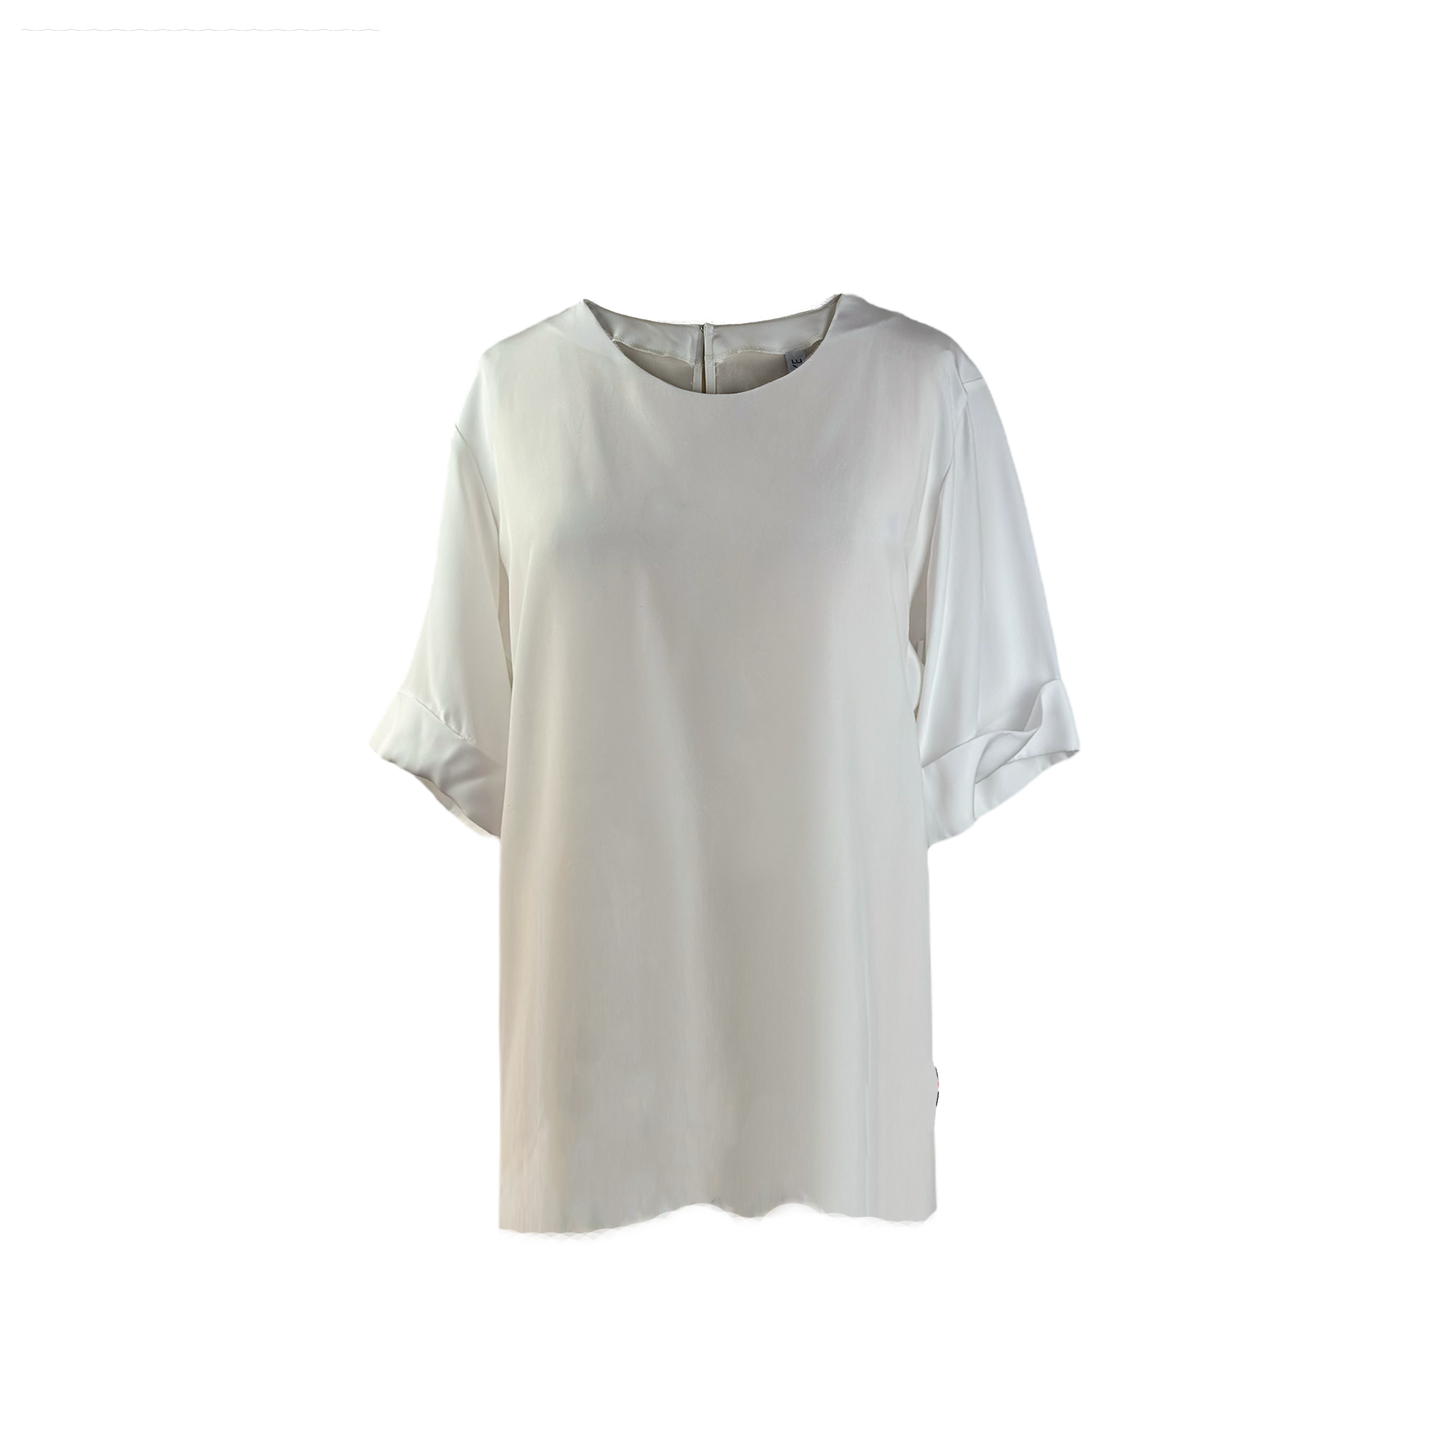 White shiny long top with folded sleeves and zipper